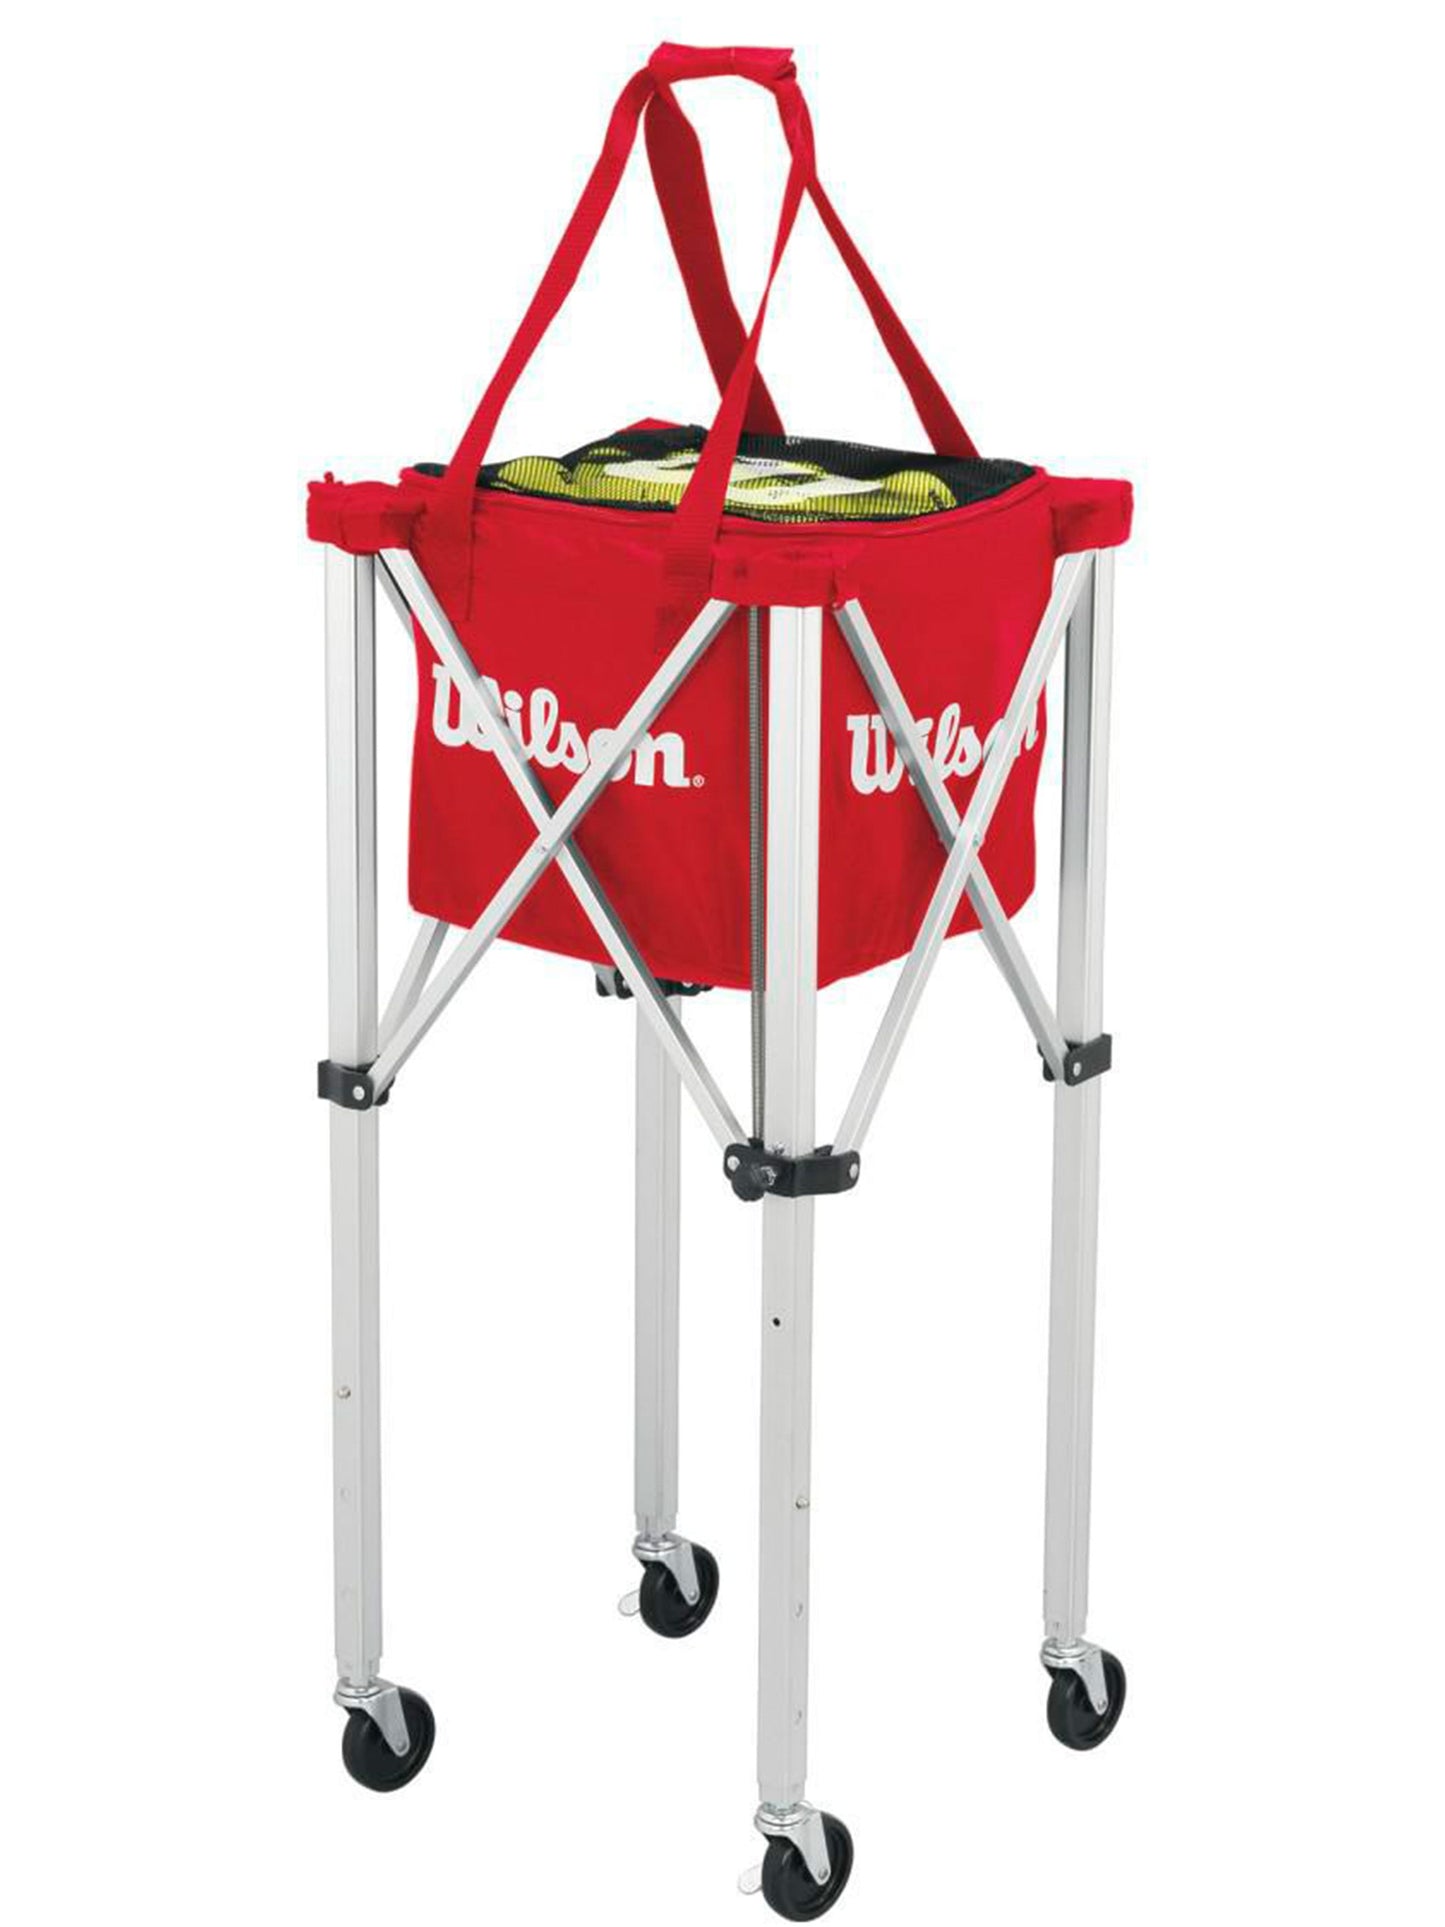 Wilson Easyball Teaching Cart 150 with Red Bag (WRZ541000)